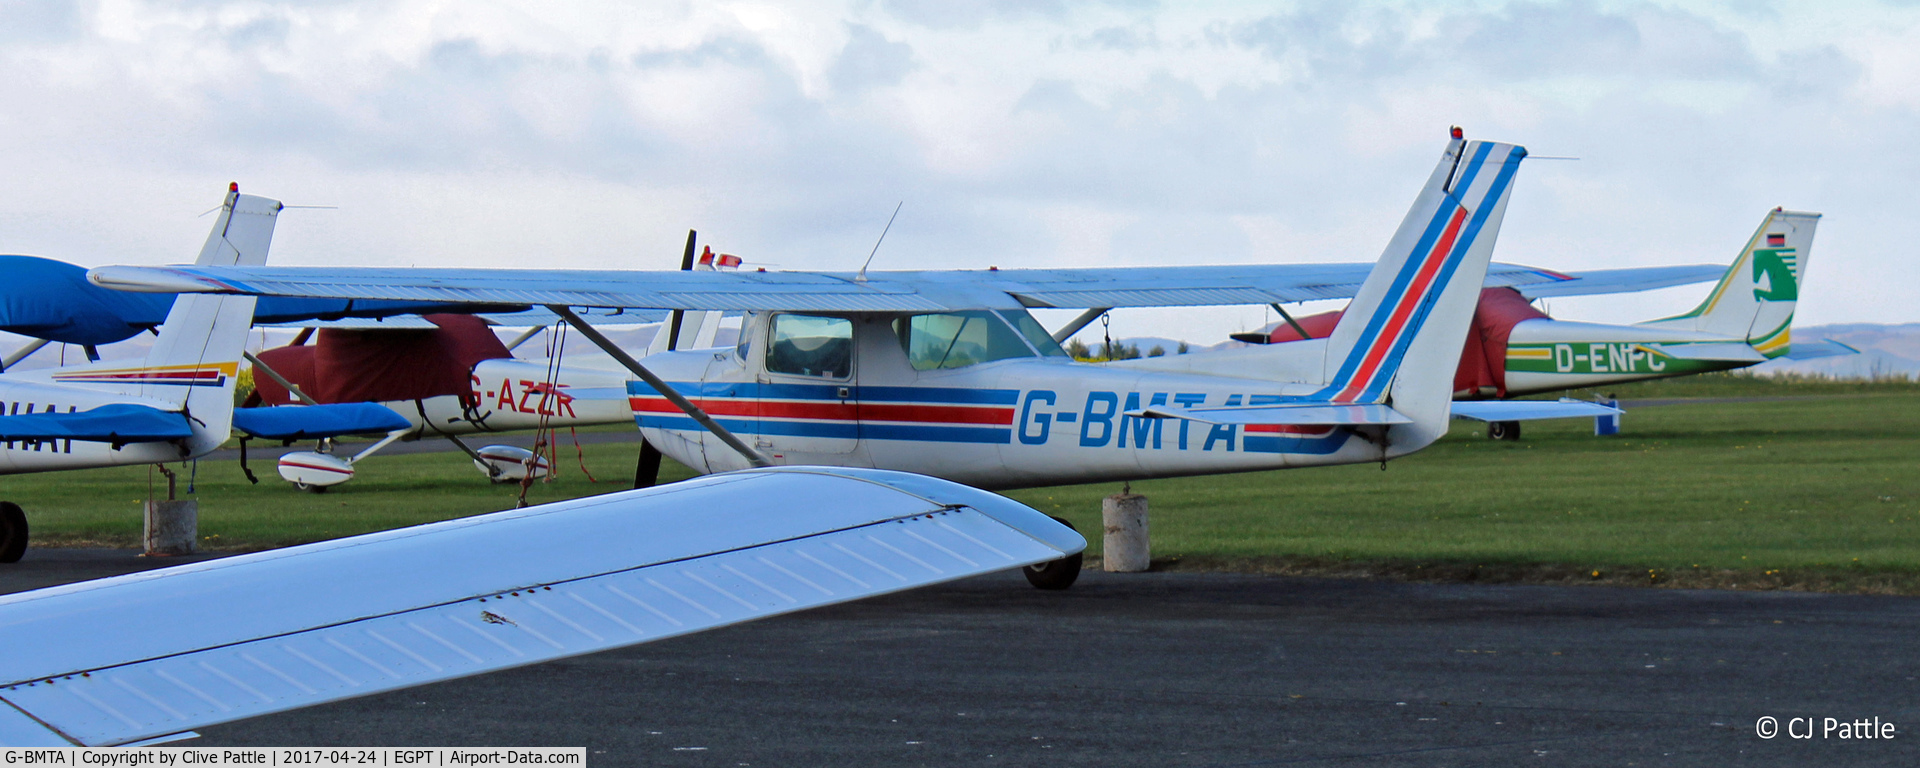 G-BMTA, 1979 Cessna 152 C/N 152-82864, Parked at Perth